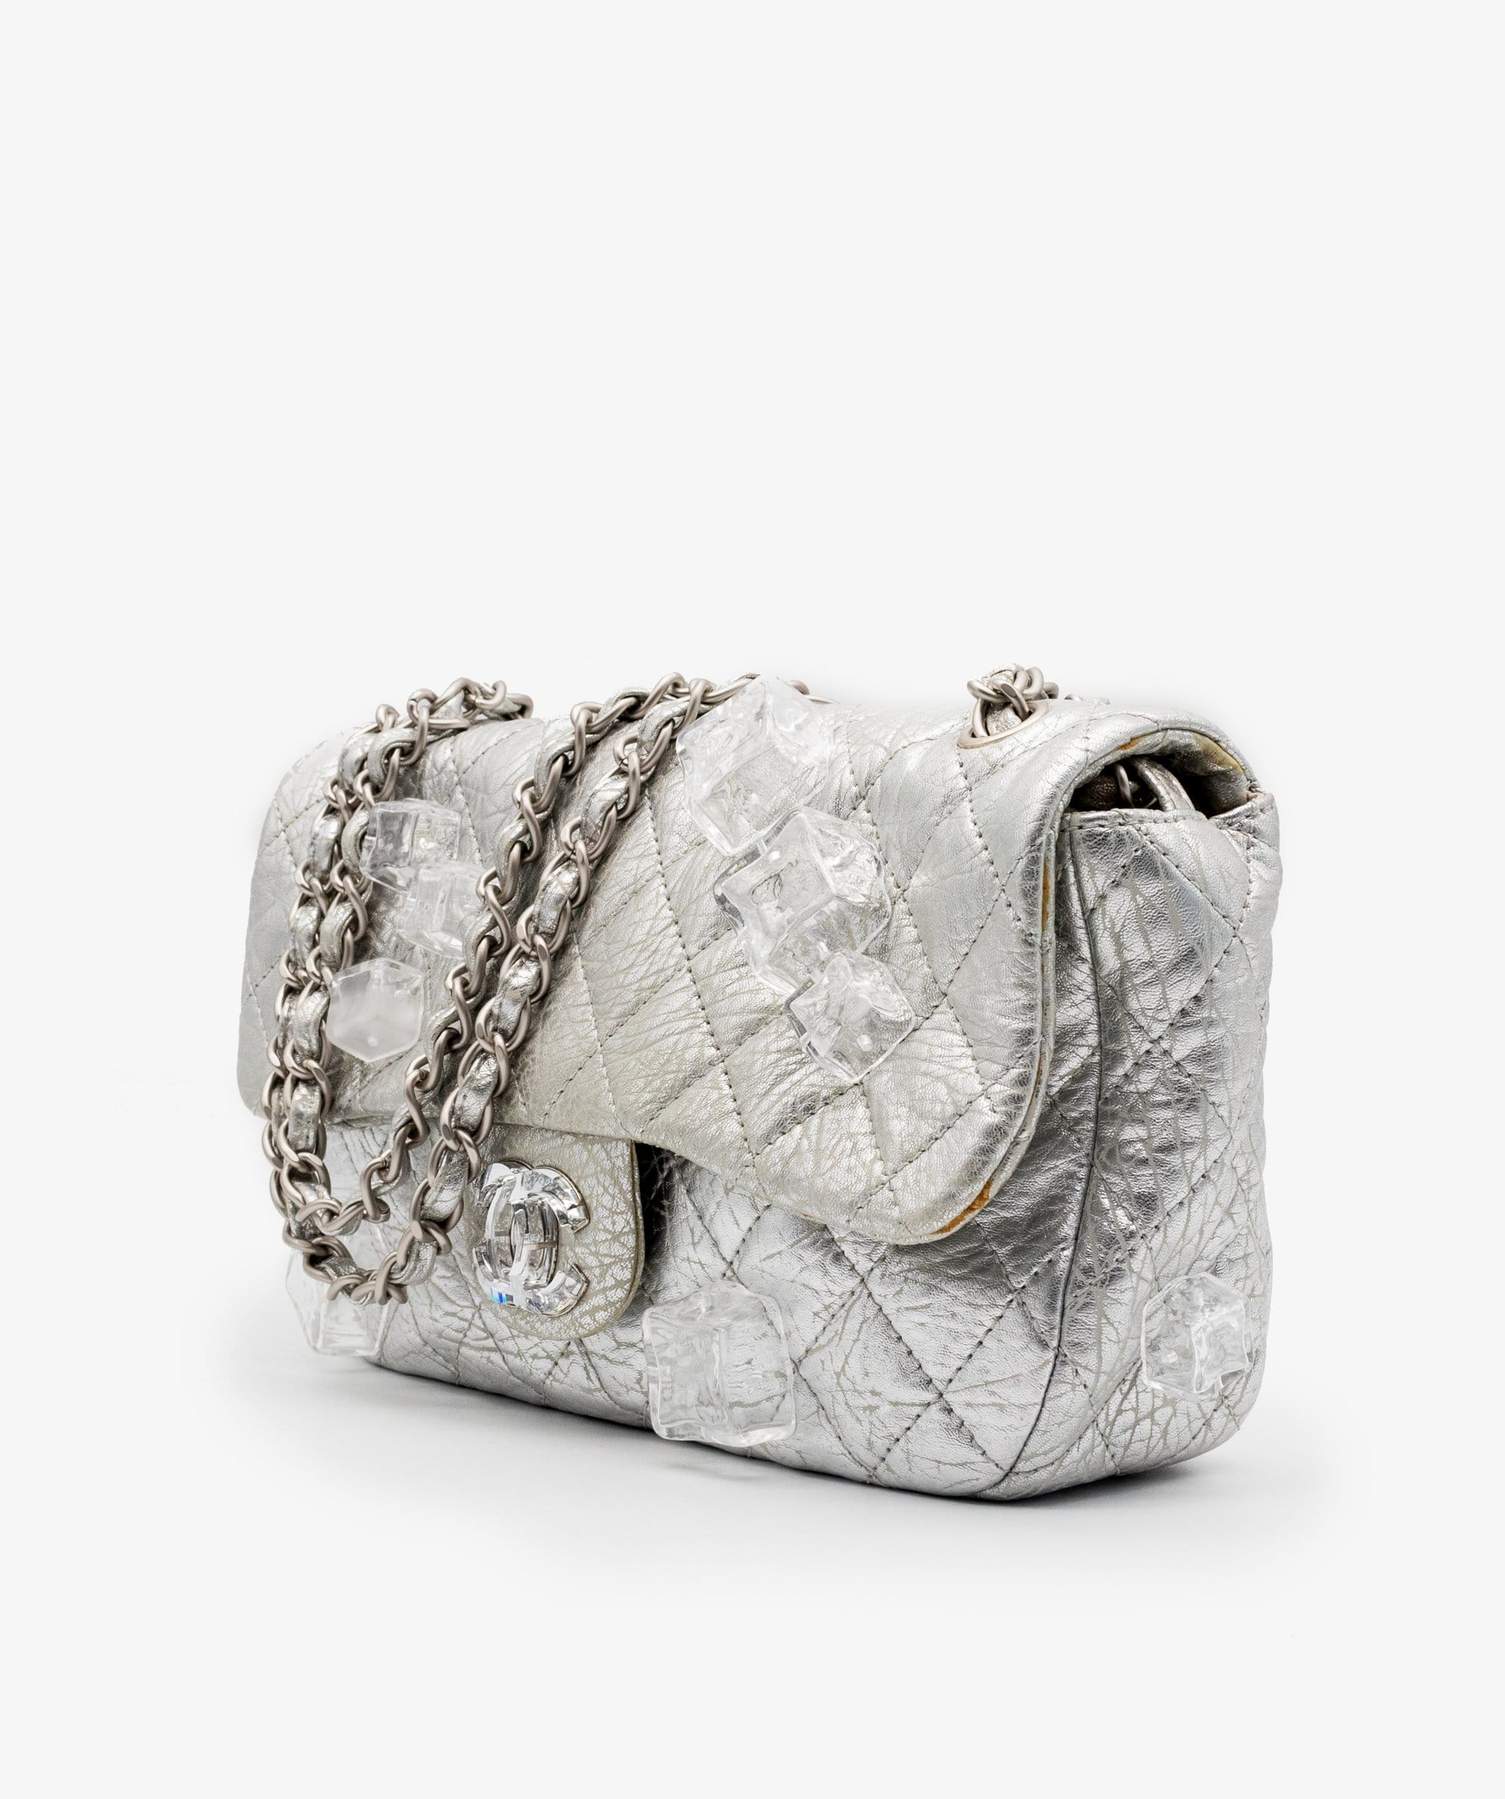 Chanel Ice Cube Bag - 5 For Sale on 1stDibs  chanel ice cube flap bag, ice  cube chanel bag, chanel ice cube tote